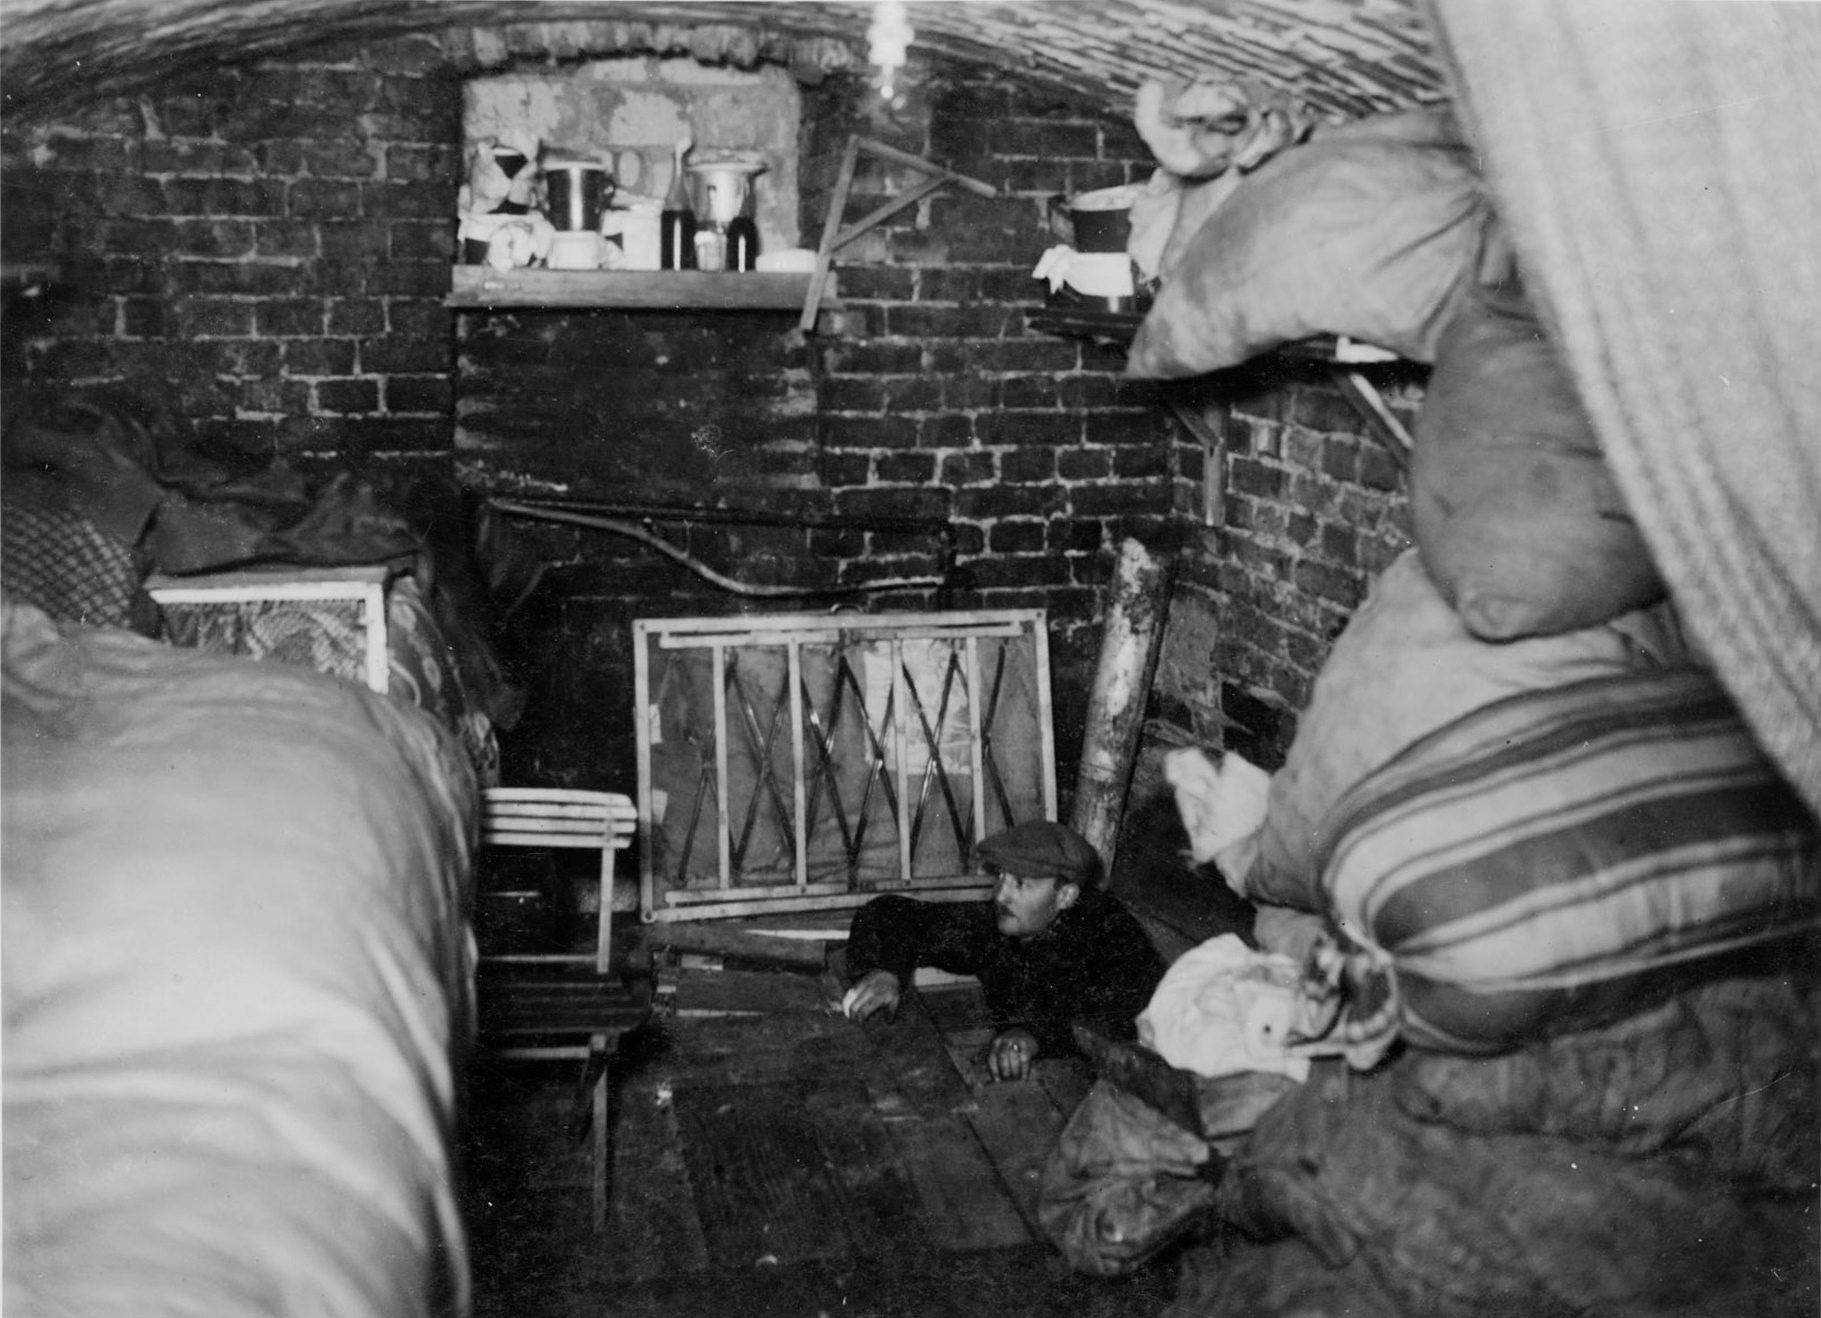 A Jewish man in his bunker during the Warsaw Ghetto Uprising, Poland, Apr-May 1943